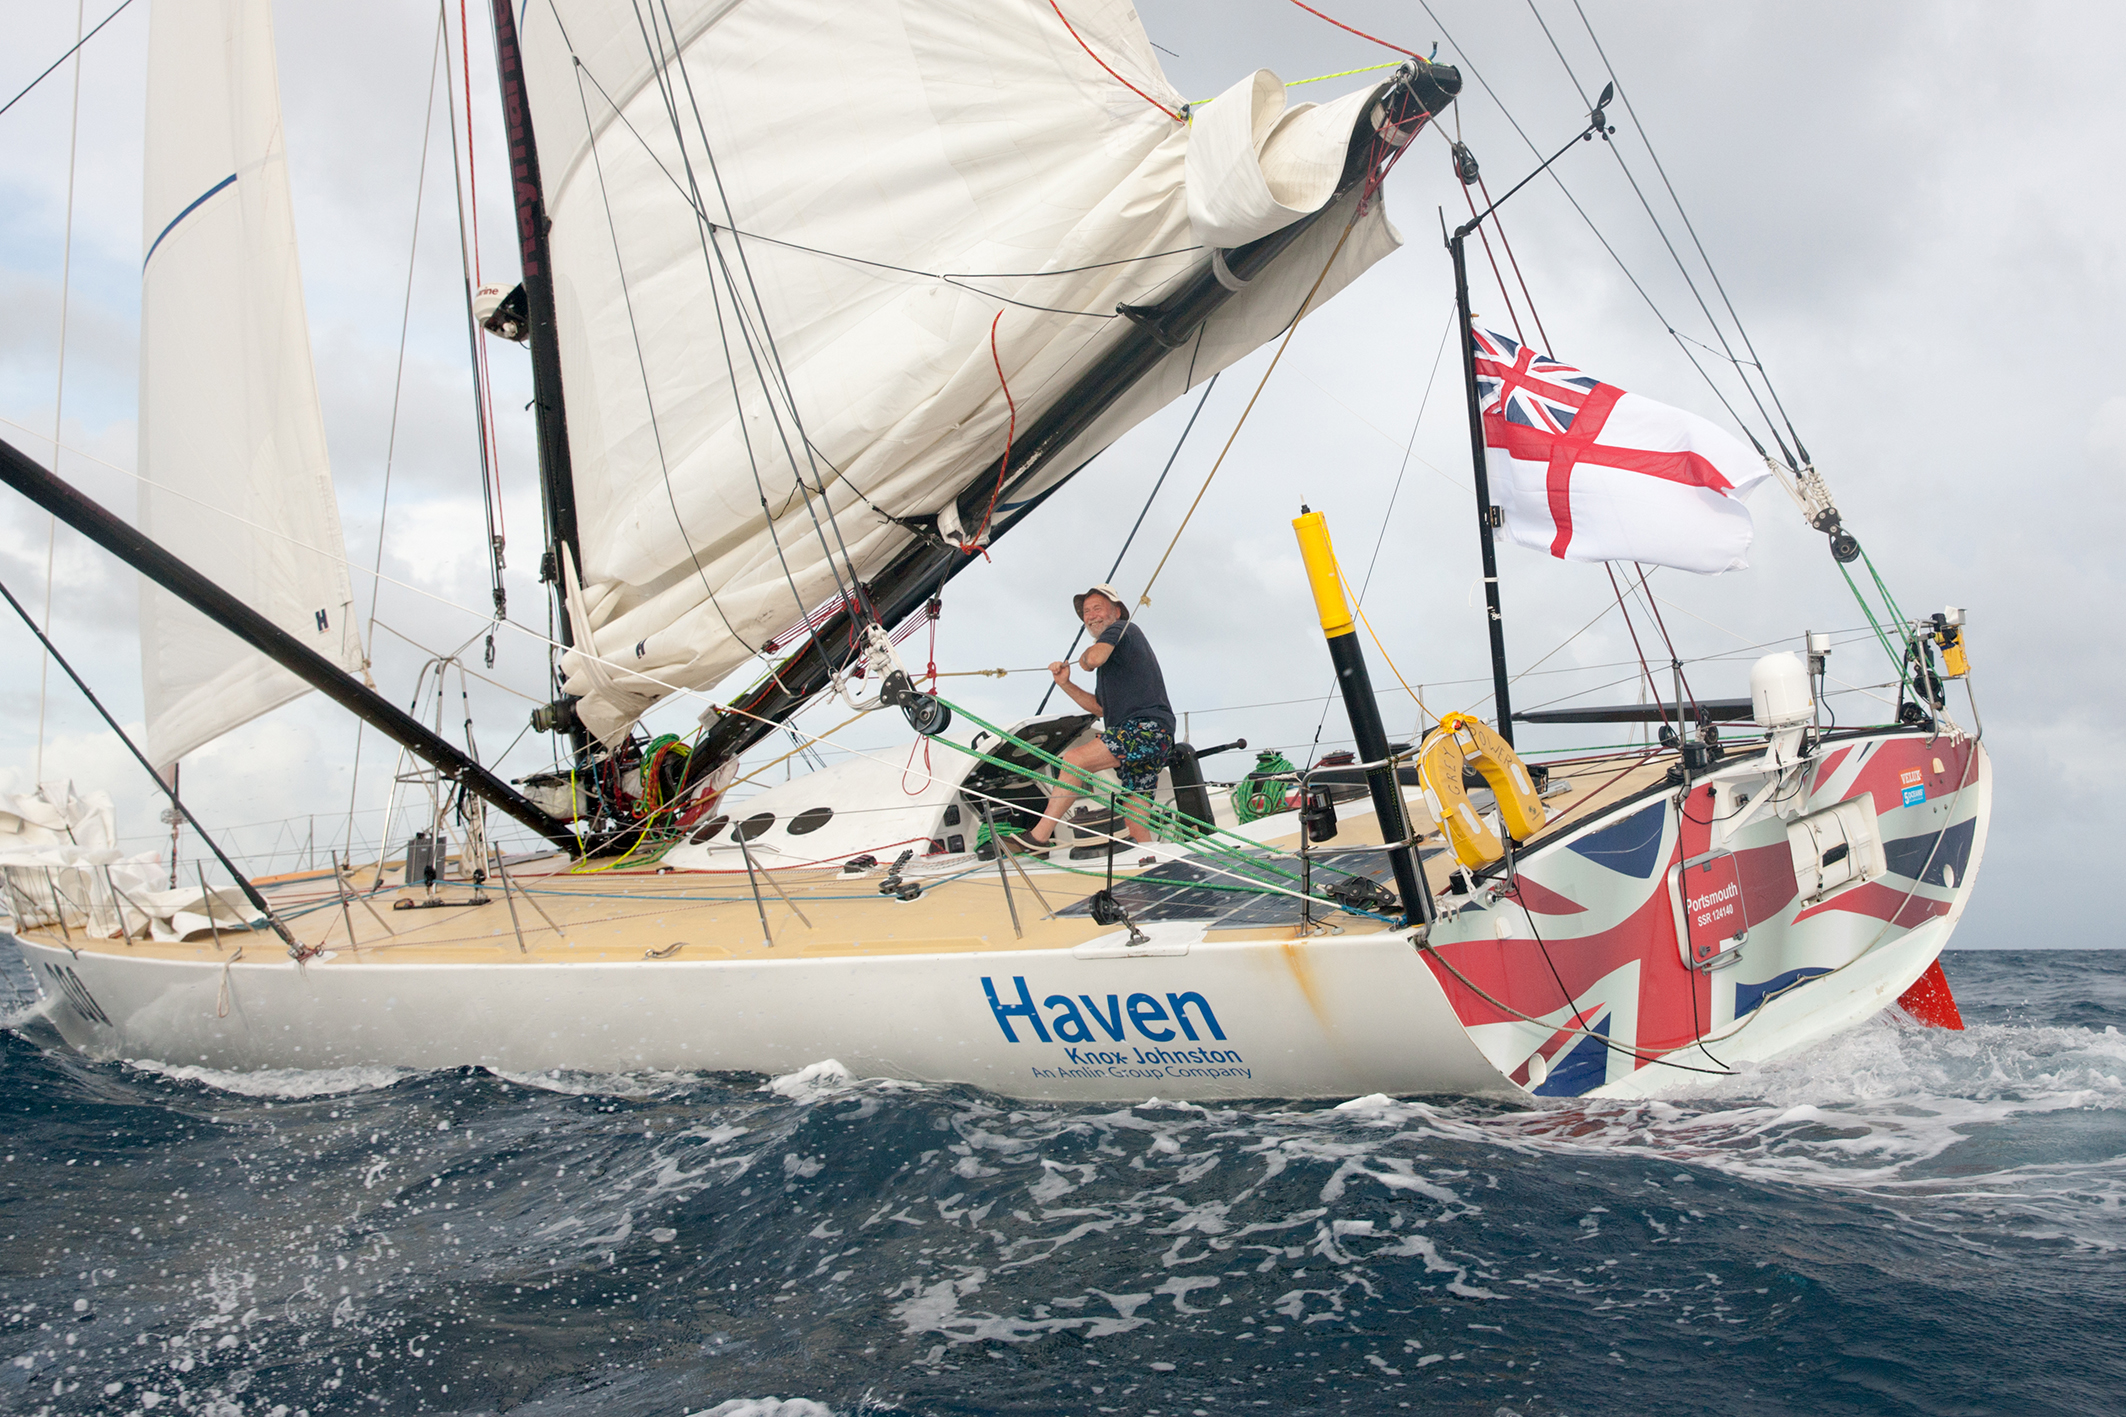 Sir Robin Knox-Johnston finished third in the Route du Rhum Rhum class yesterday. Picture: Breschi